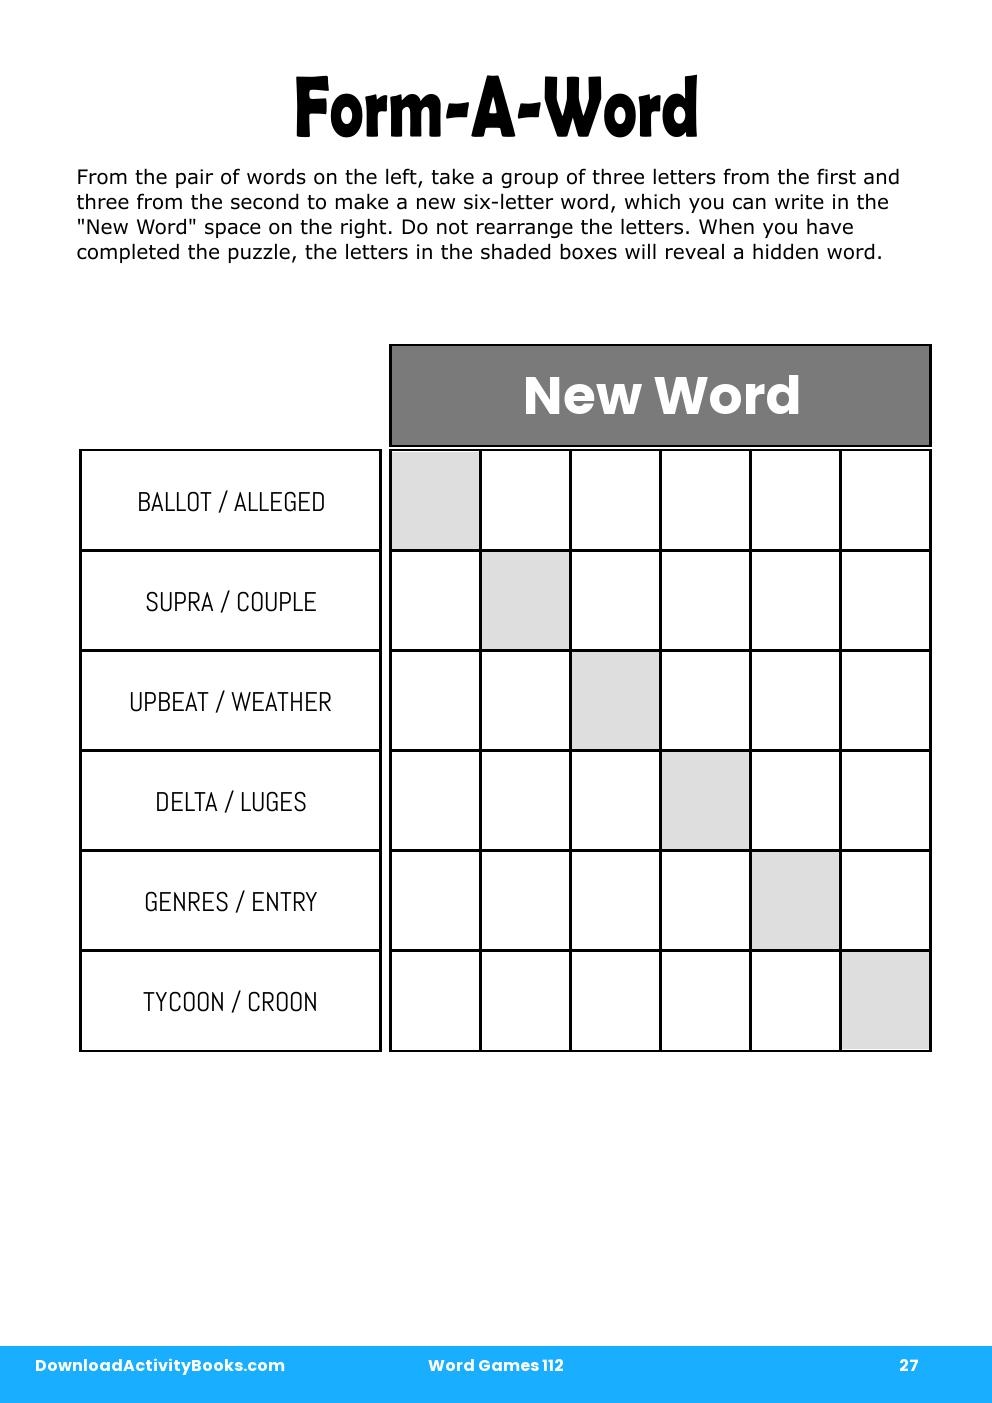 Form-A-Word in Word Games 112